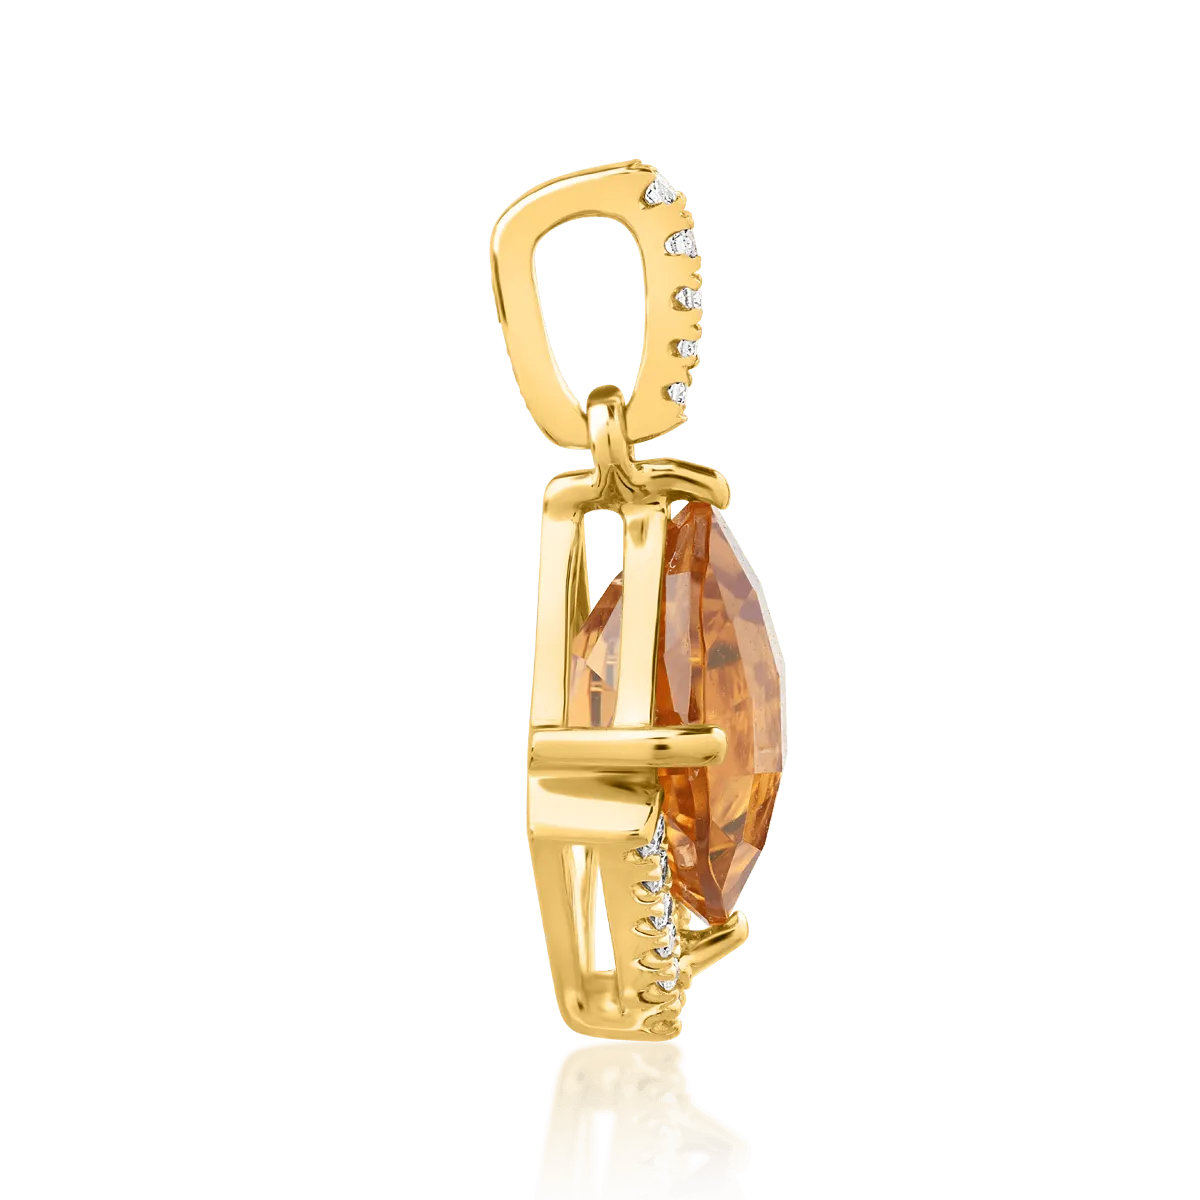 18K yellow gold pendant with citrine of 2.2ct and diamonds of 0.08ct